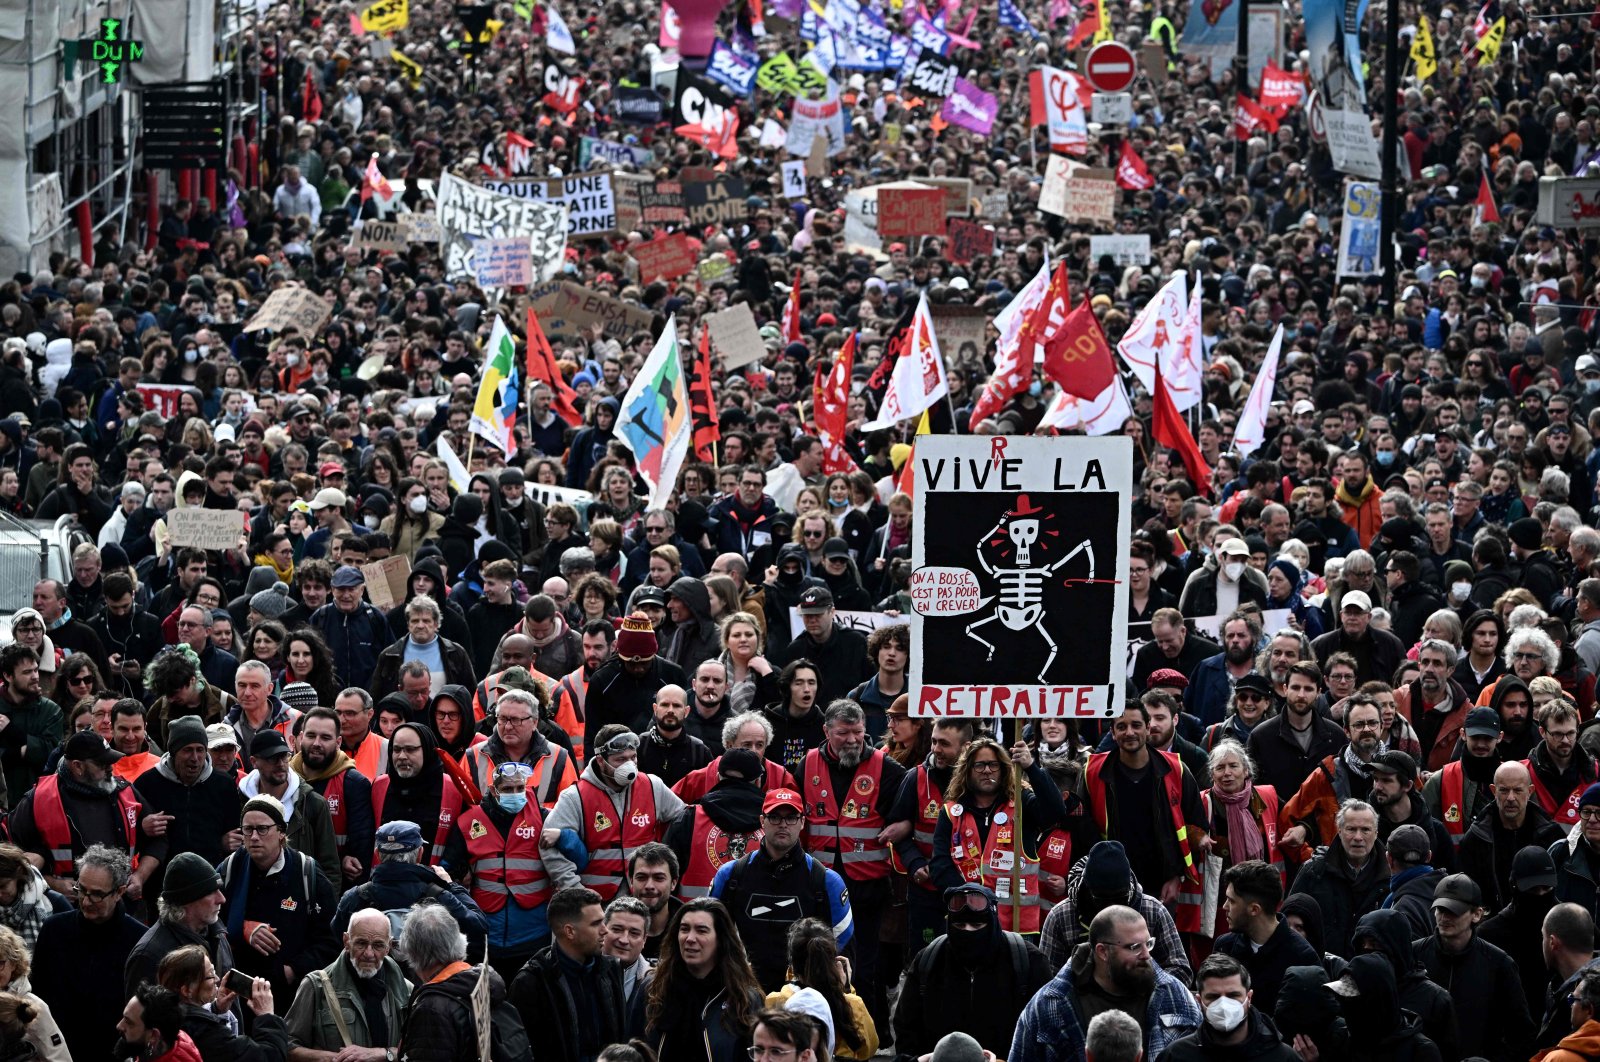 Protestors walk during a demonstration in Nantes, western France, March 23, 2023. (AFP Photo)